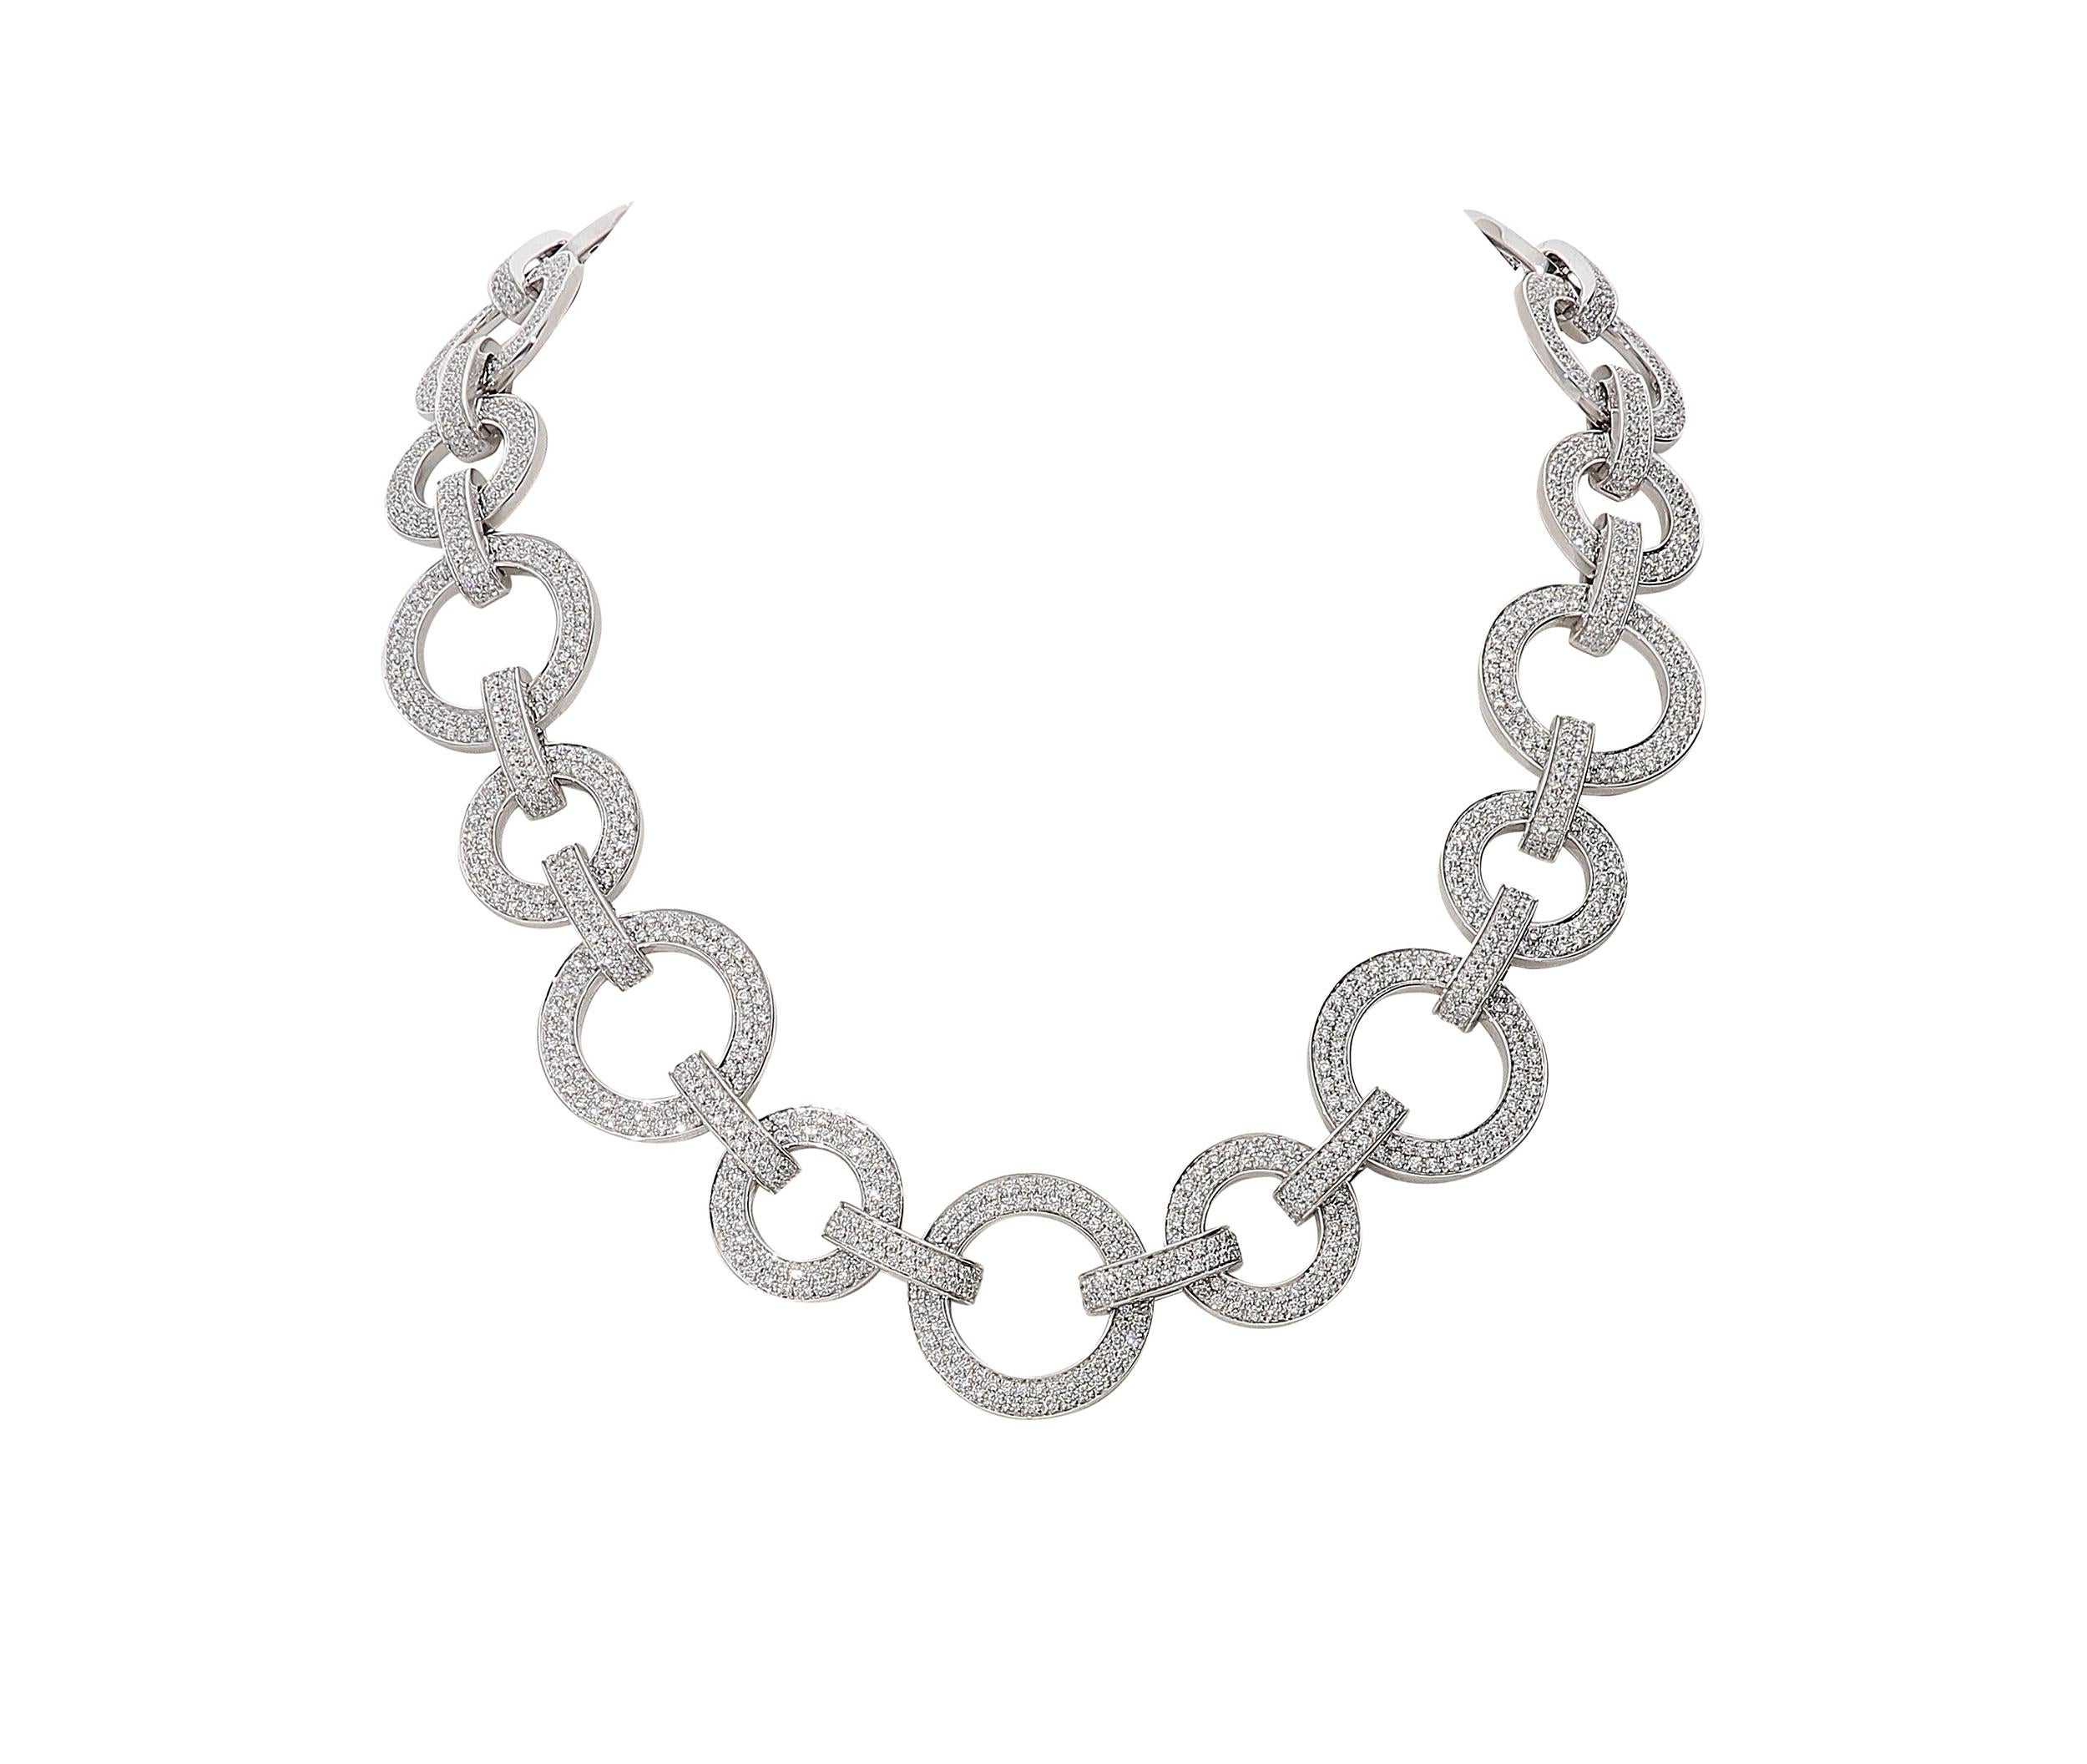 Impressive necklace in 18kt white gold for 131,70 grams and a length of 43 centimeters.
The circle elements are 2,00 and 2,50 centimeters of width and the clasp is one of the connection link.
Diamonds are white round brilliant color G clarity VS for